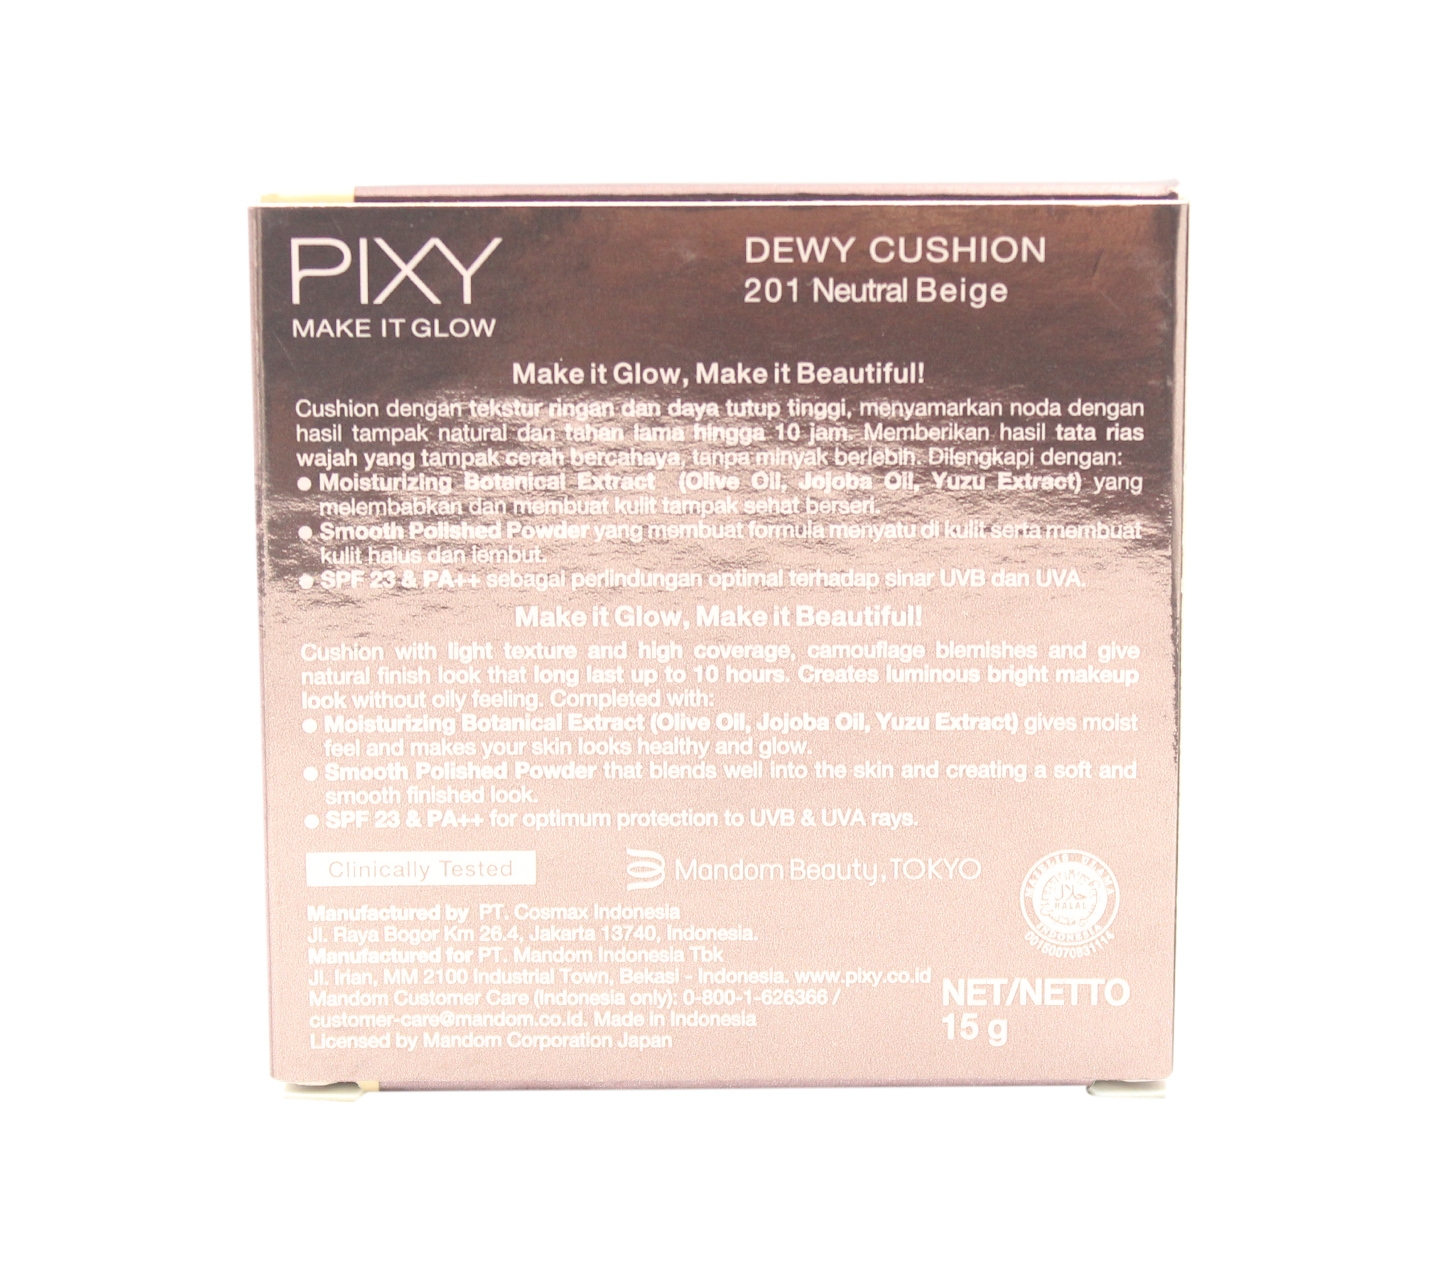 Pixy 201 Nautural Beige Dewy Cushion Make It Glow Faces